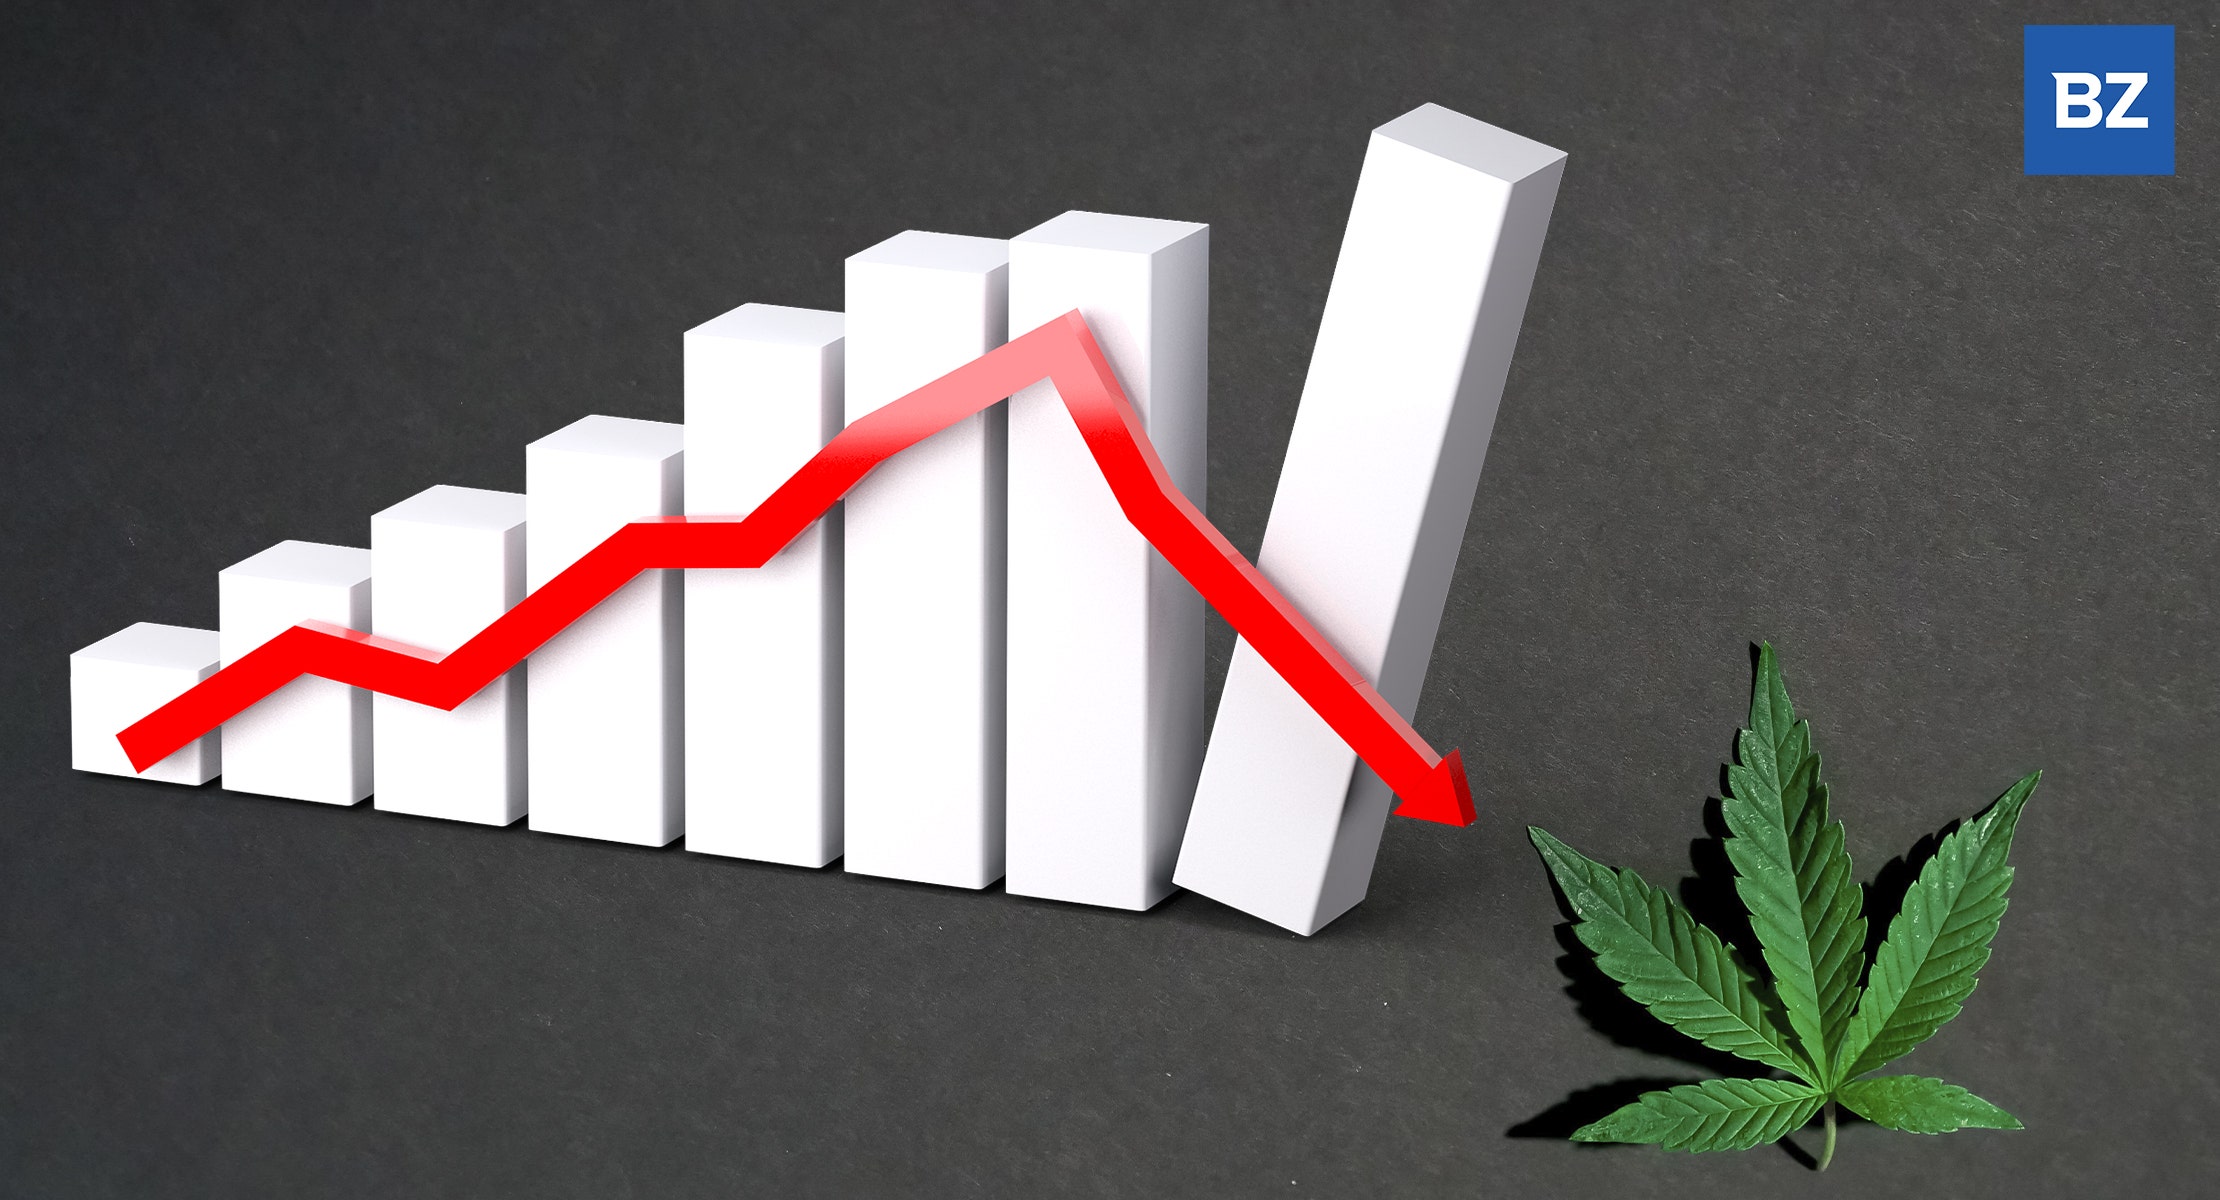 'One Of Best-In-Class' Cannabis MSOs Has 'Optionality' When States Go Recreational, Bullish Analyst Says After Results